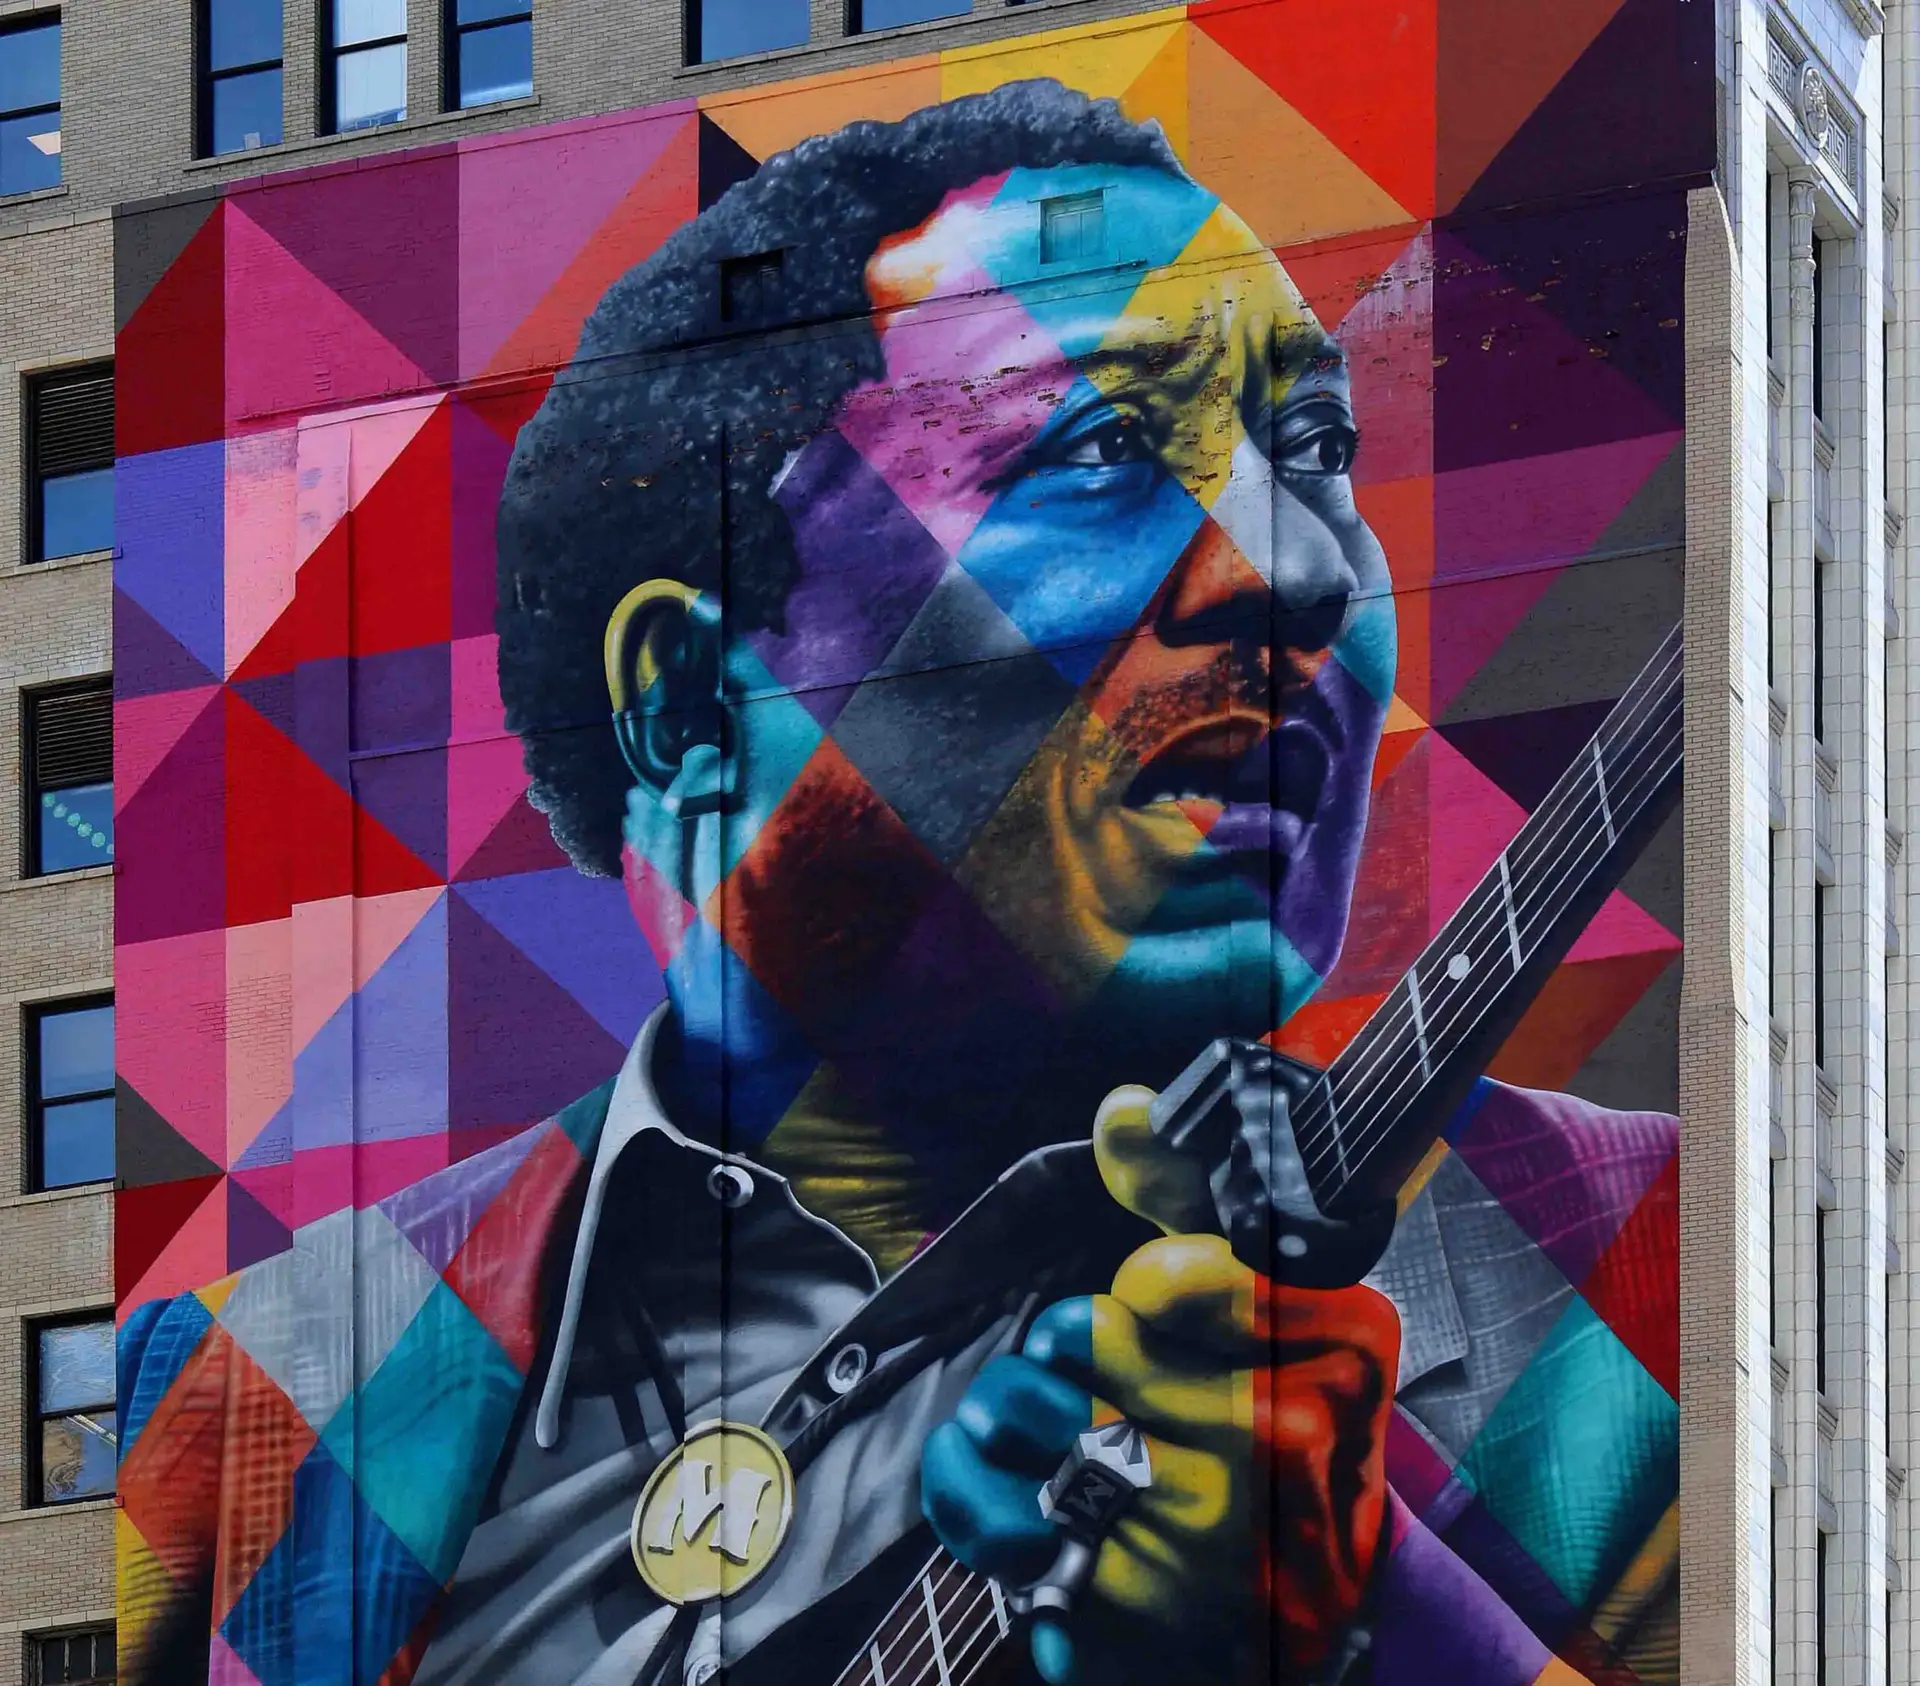 Eduardo Kobra's 'Muddy Waters Tribute' mural, part of the Wabash Arts Corridor is displayed downtown in Chicago, Illinois on April 13, 2019.